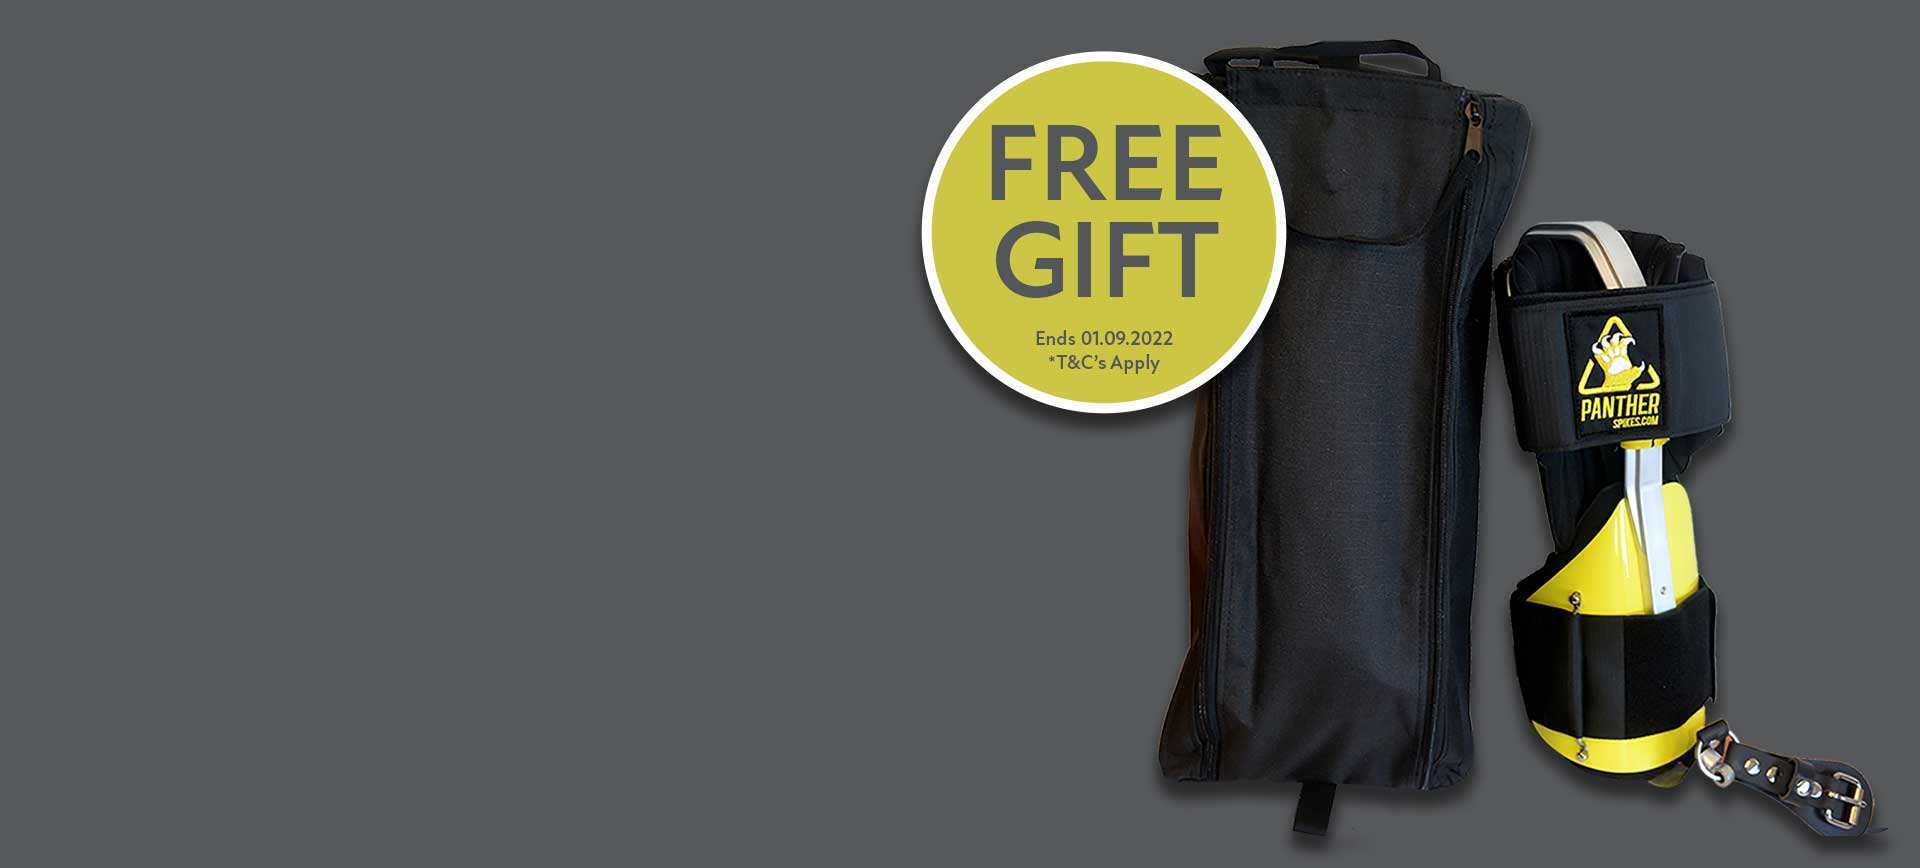 free carry bag with spike offer